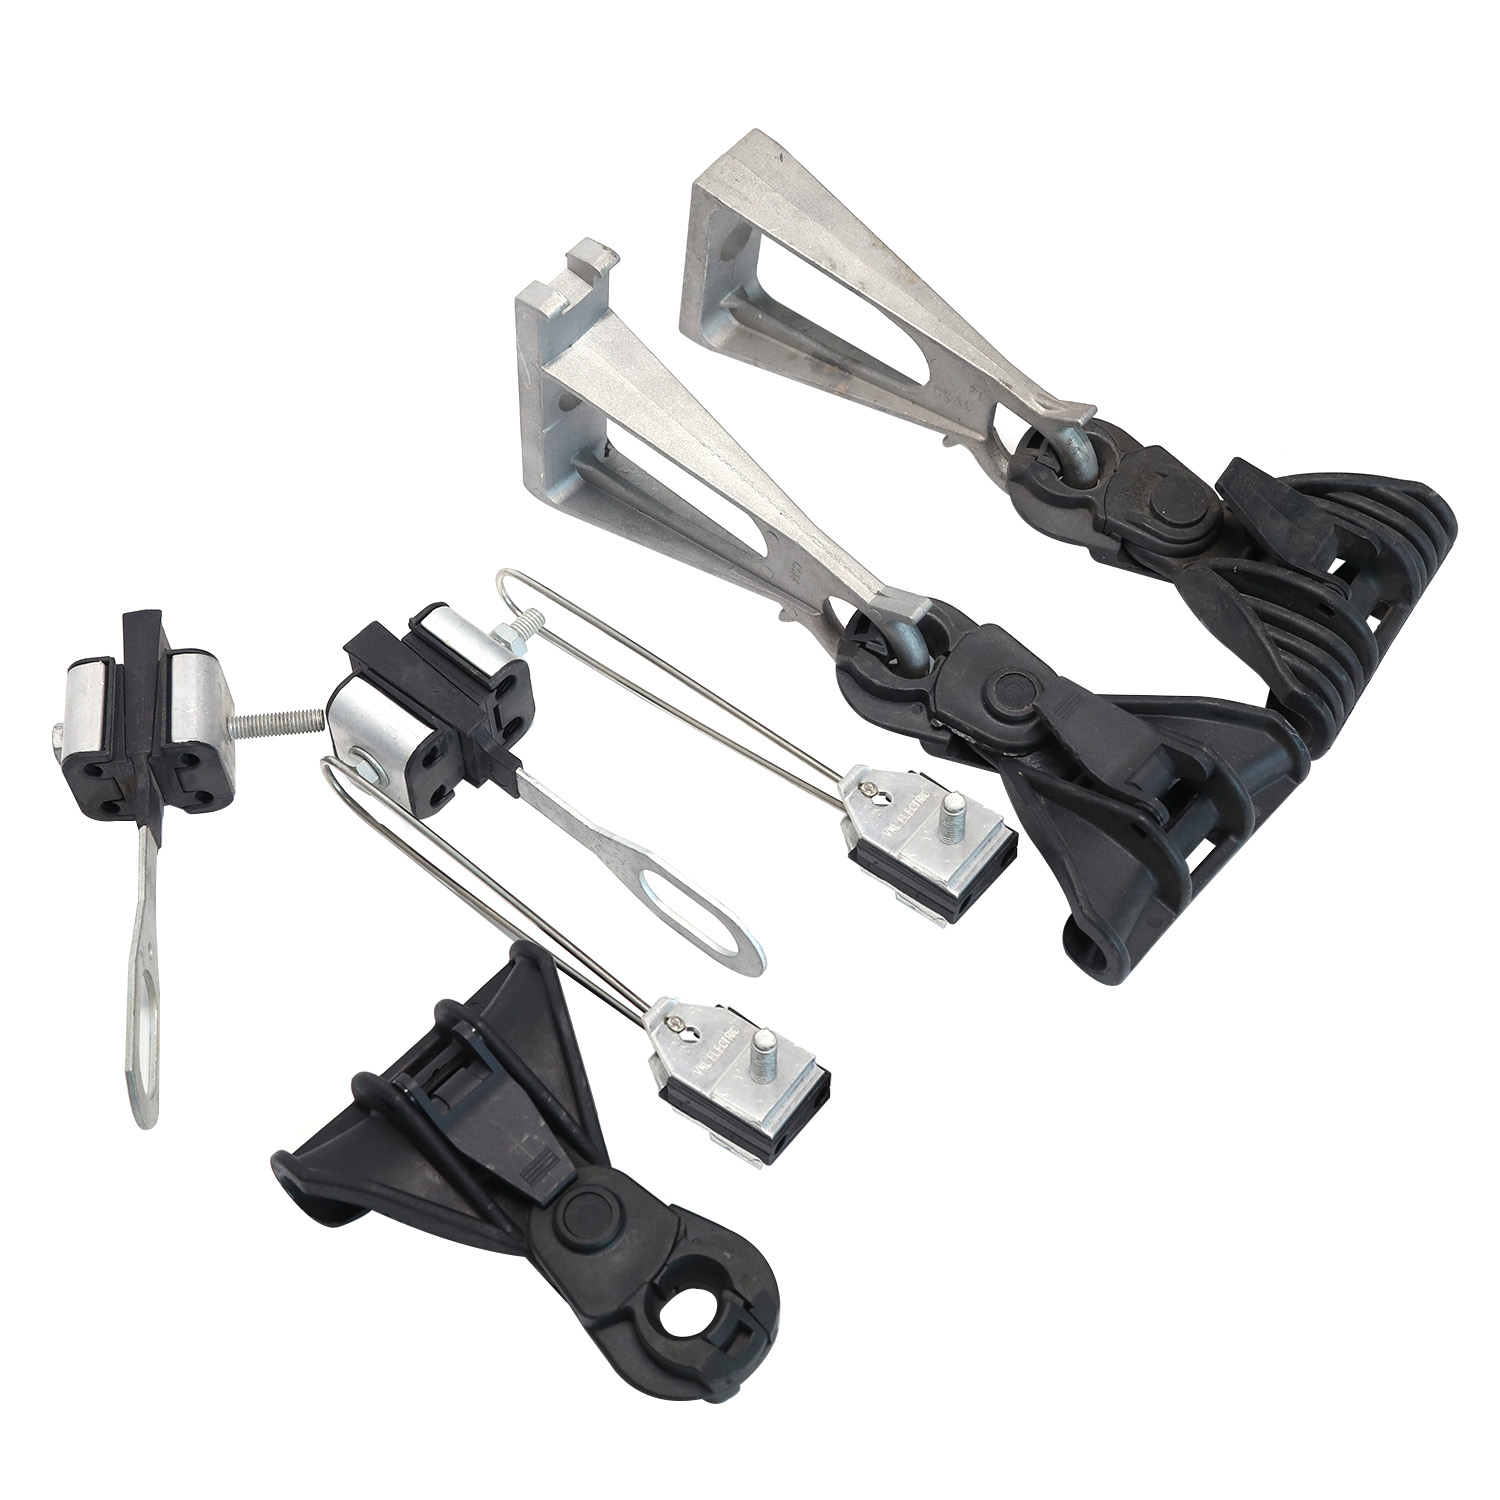 OEM Basiccustomization Fiber Optic Drop Cable Clamp Insulation Suspension Dead End Anchor Clamps